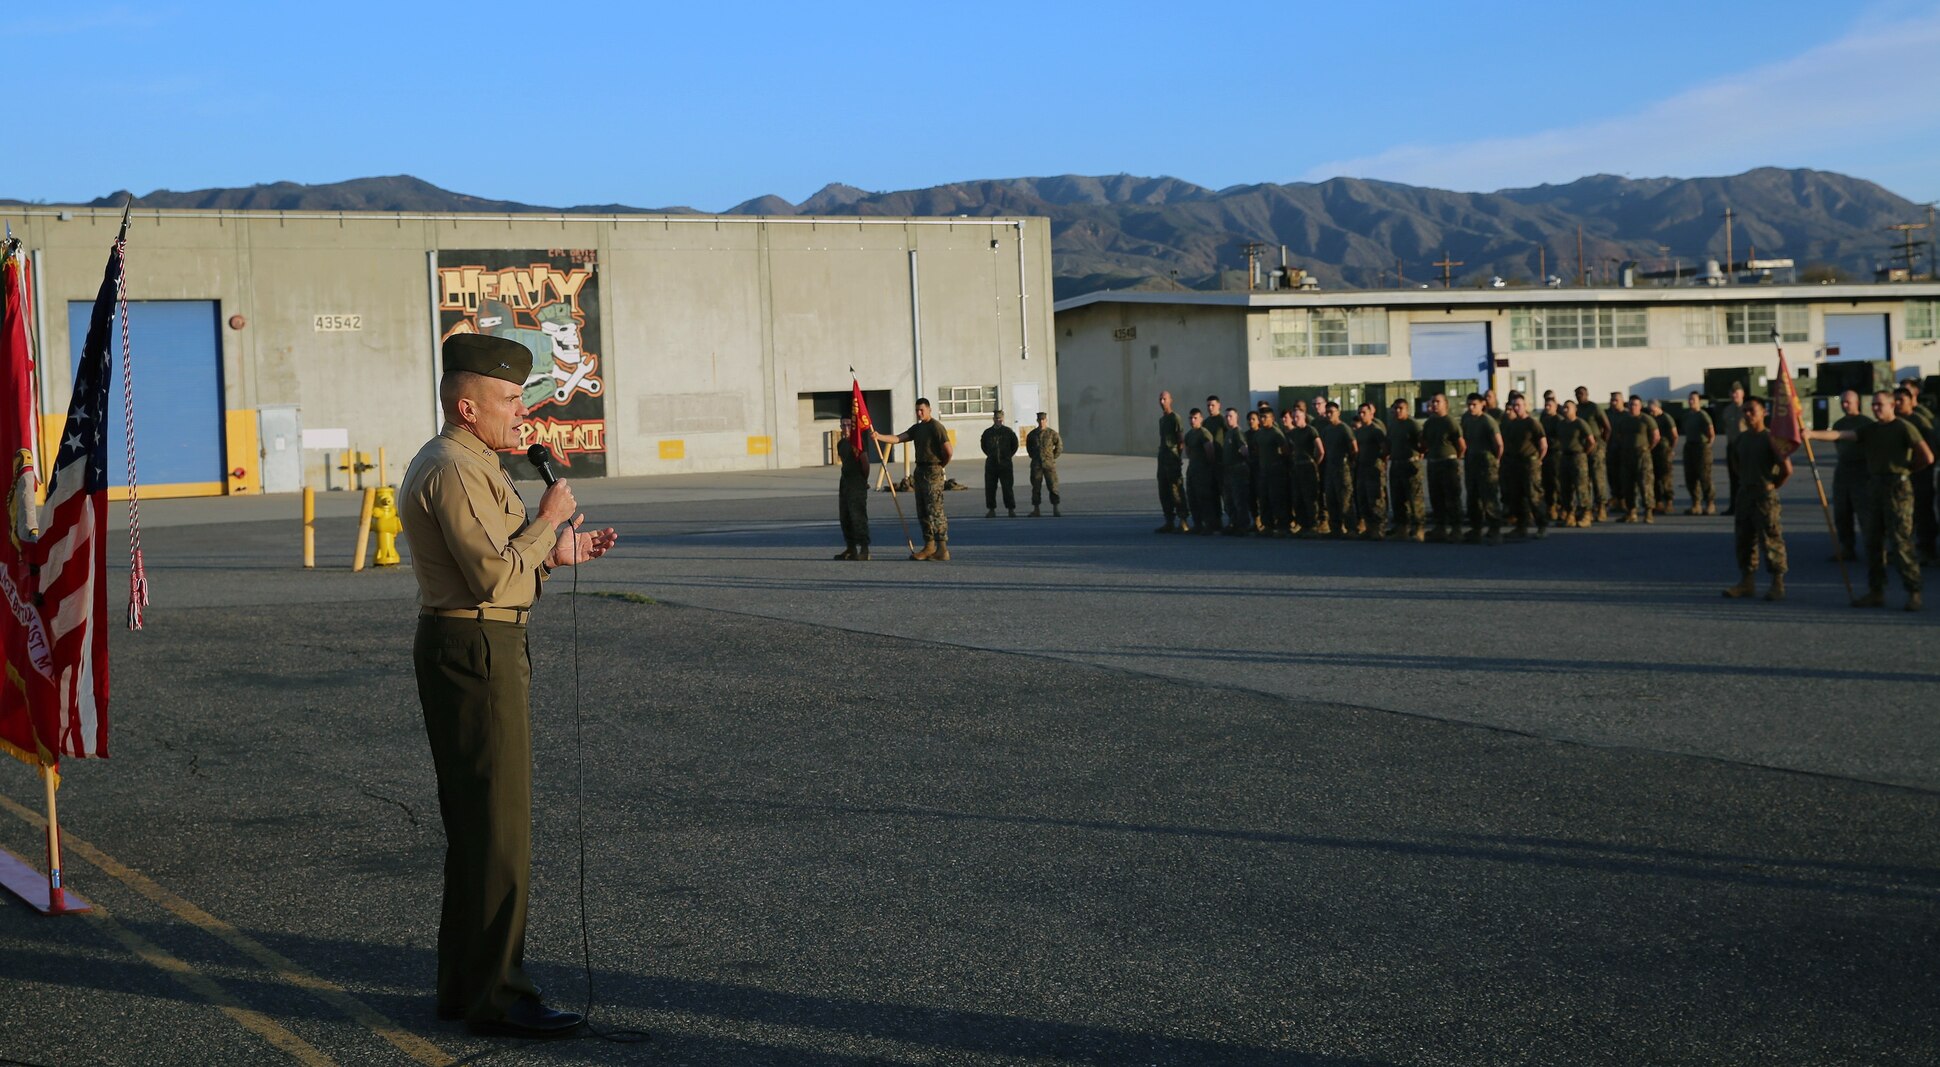 Major Gen. Vincent Coglianese, commanding general 1st Marine Logistics Group, talks to Marines with 1st Maintenance Battalion, Combat Logistics Regiment 15, 1st MLG, during an award ceremony aboard Camp Pendleton, California, Dec. 19, 2014. (Marine Corps photo by Cpl. Cody Haas/ Released)